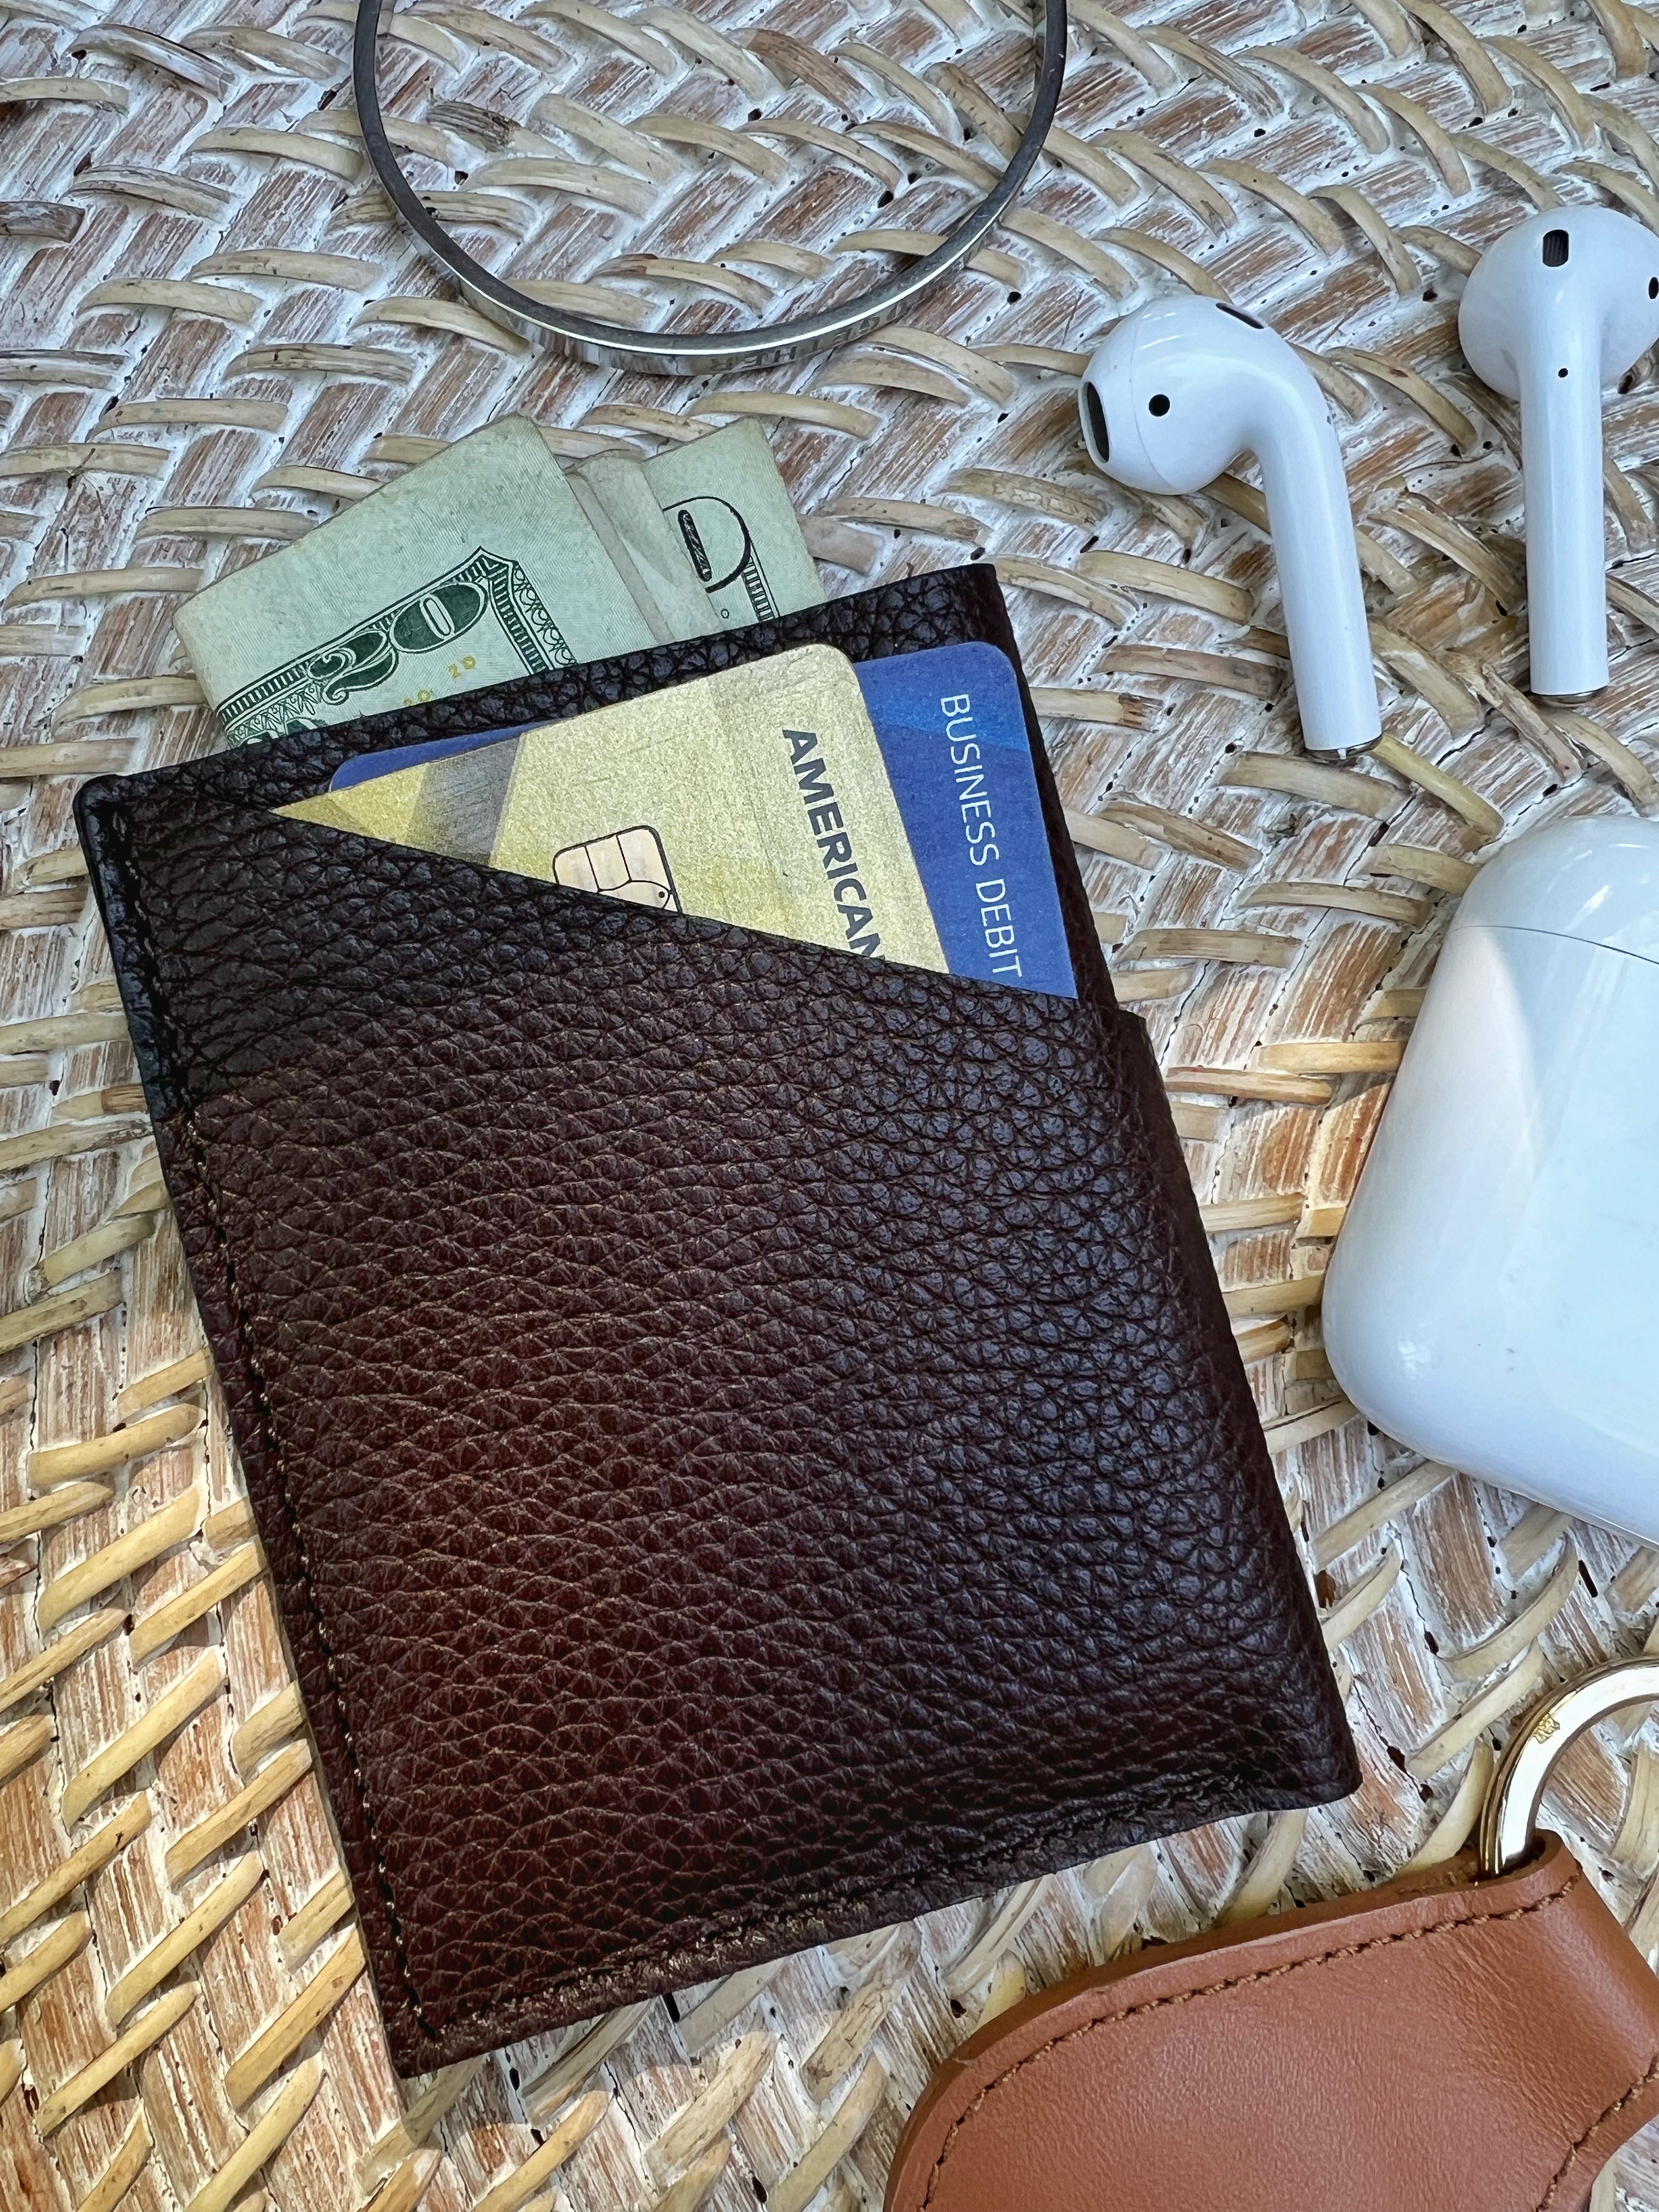 20 Professional Corporate Gifts Idea Under $100 | Rustic Leather Card & Cash Holder